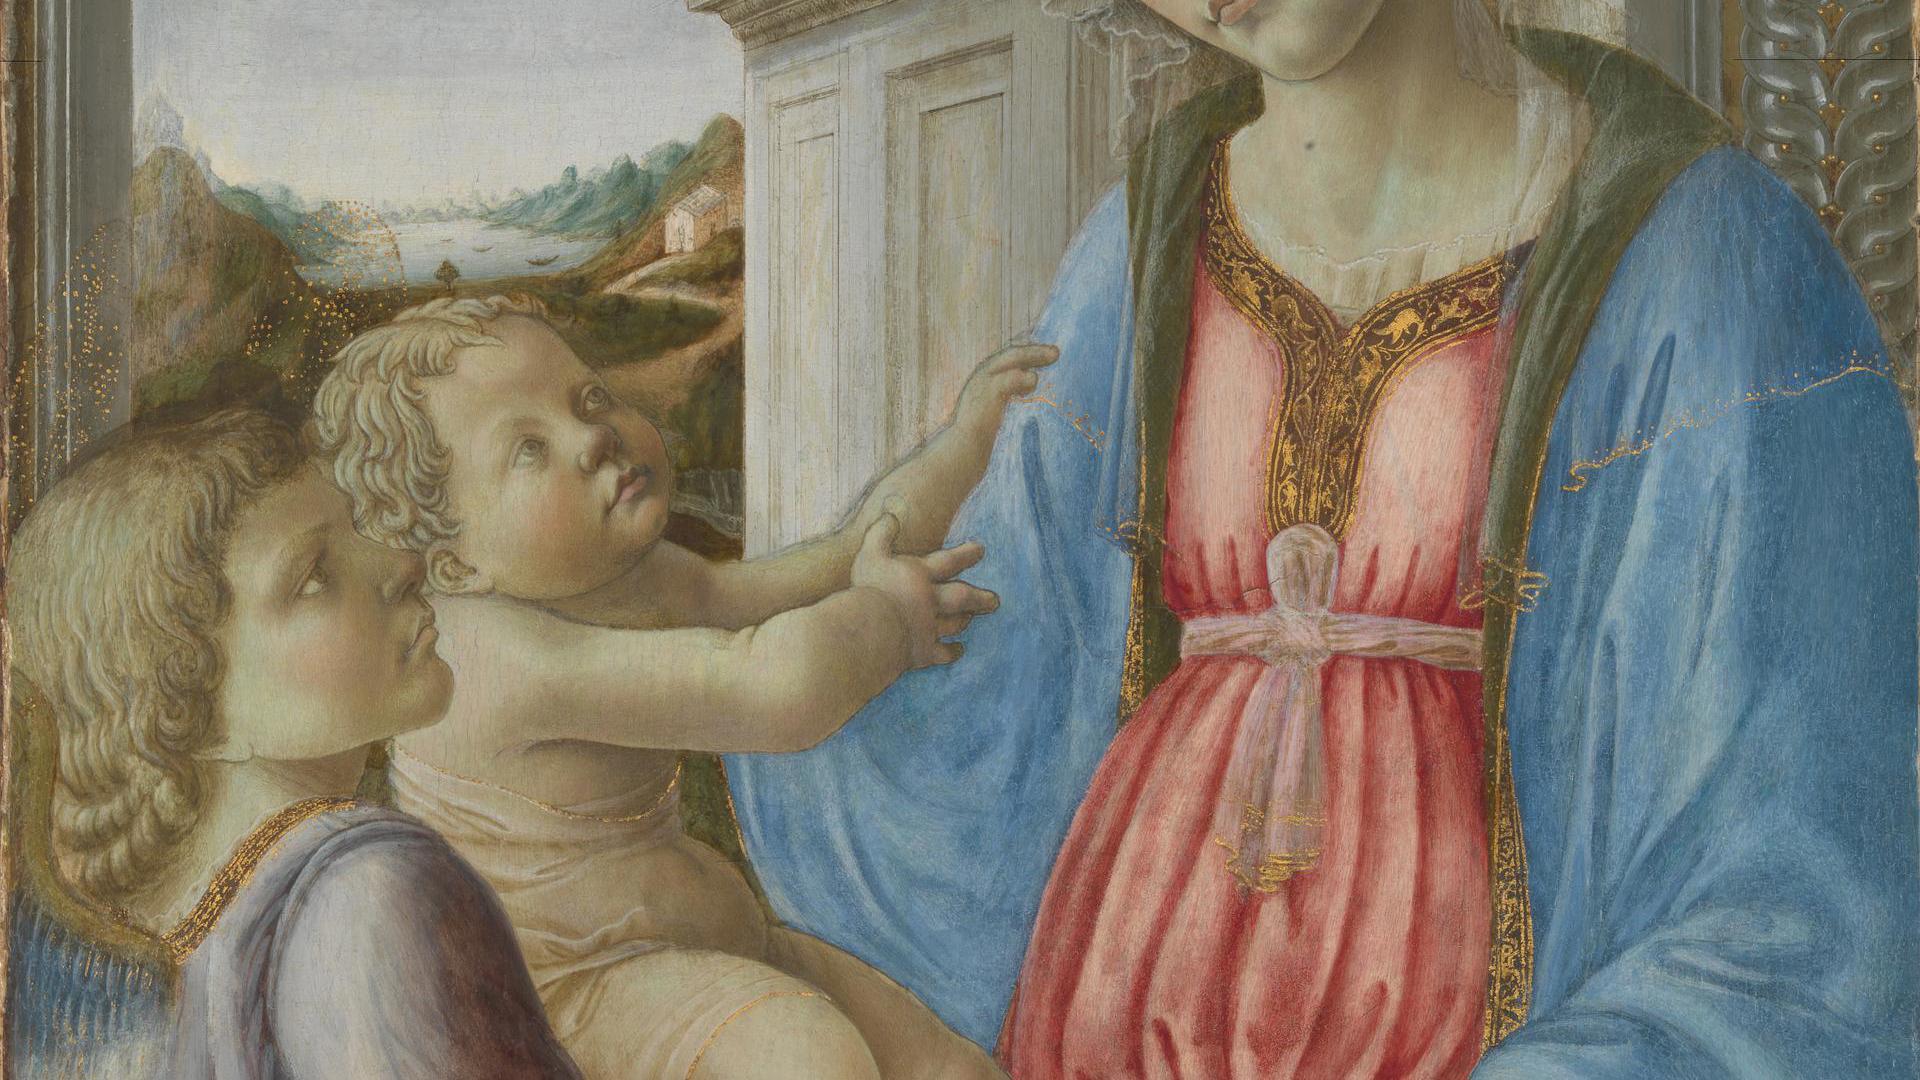 The Virgin and Child with an Angel by Imitator of Fra Filippo Lippi